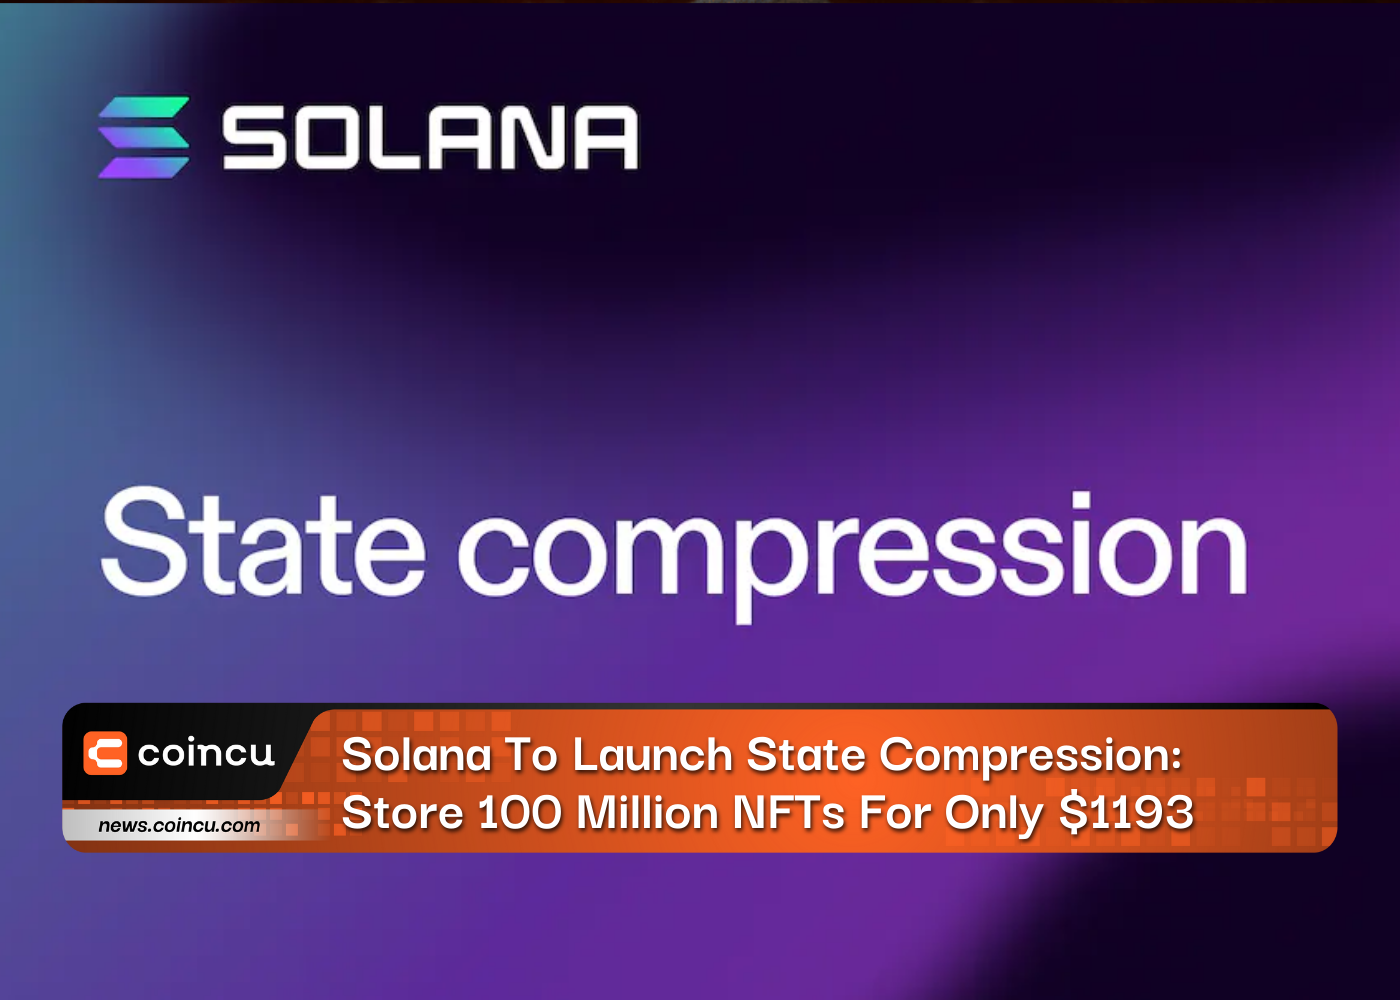 Solana To Launch State Compression: Store 100 Million NFTs For Only $1193